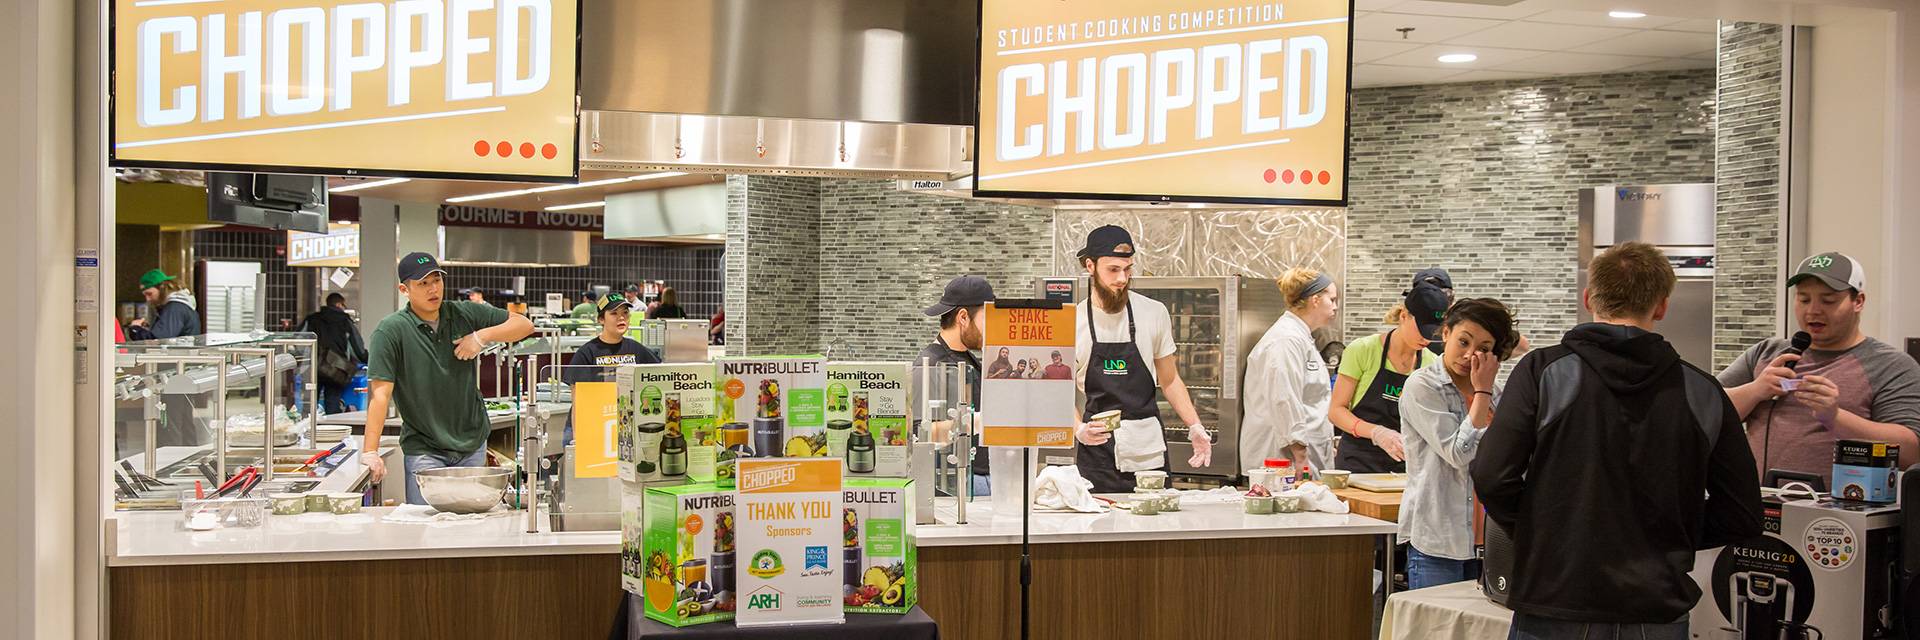 UND chopped competition tables